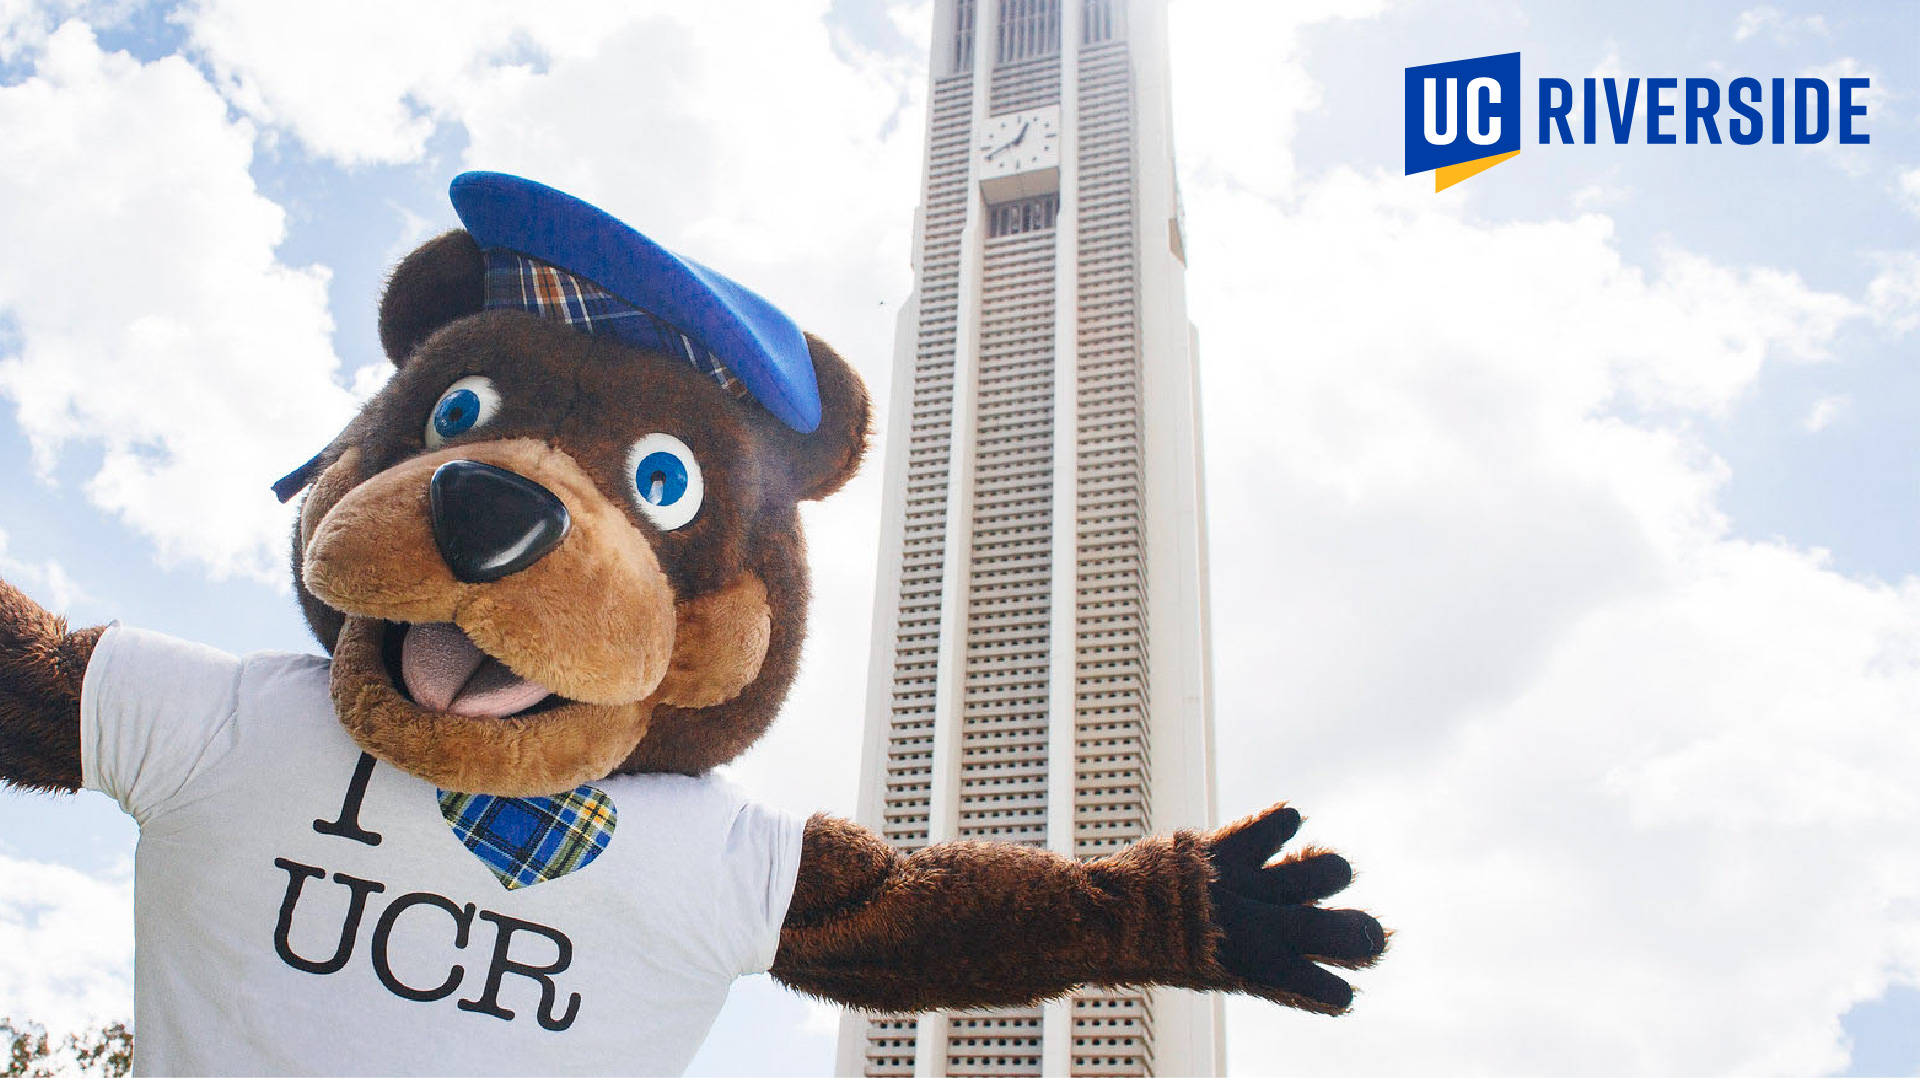 Scotty And Ucr Bell Tower Wallpaper